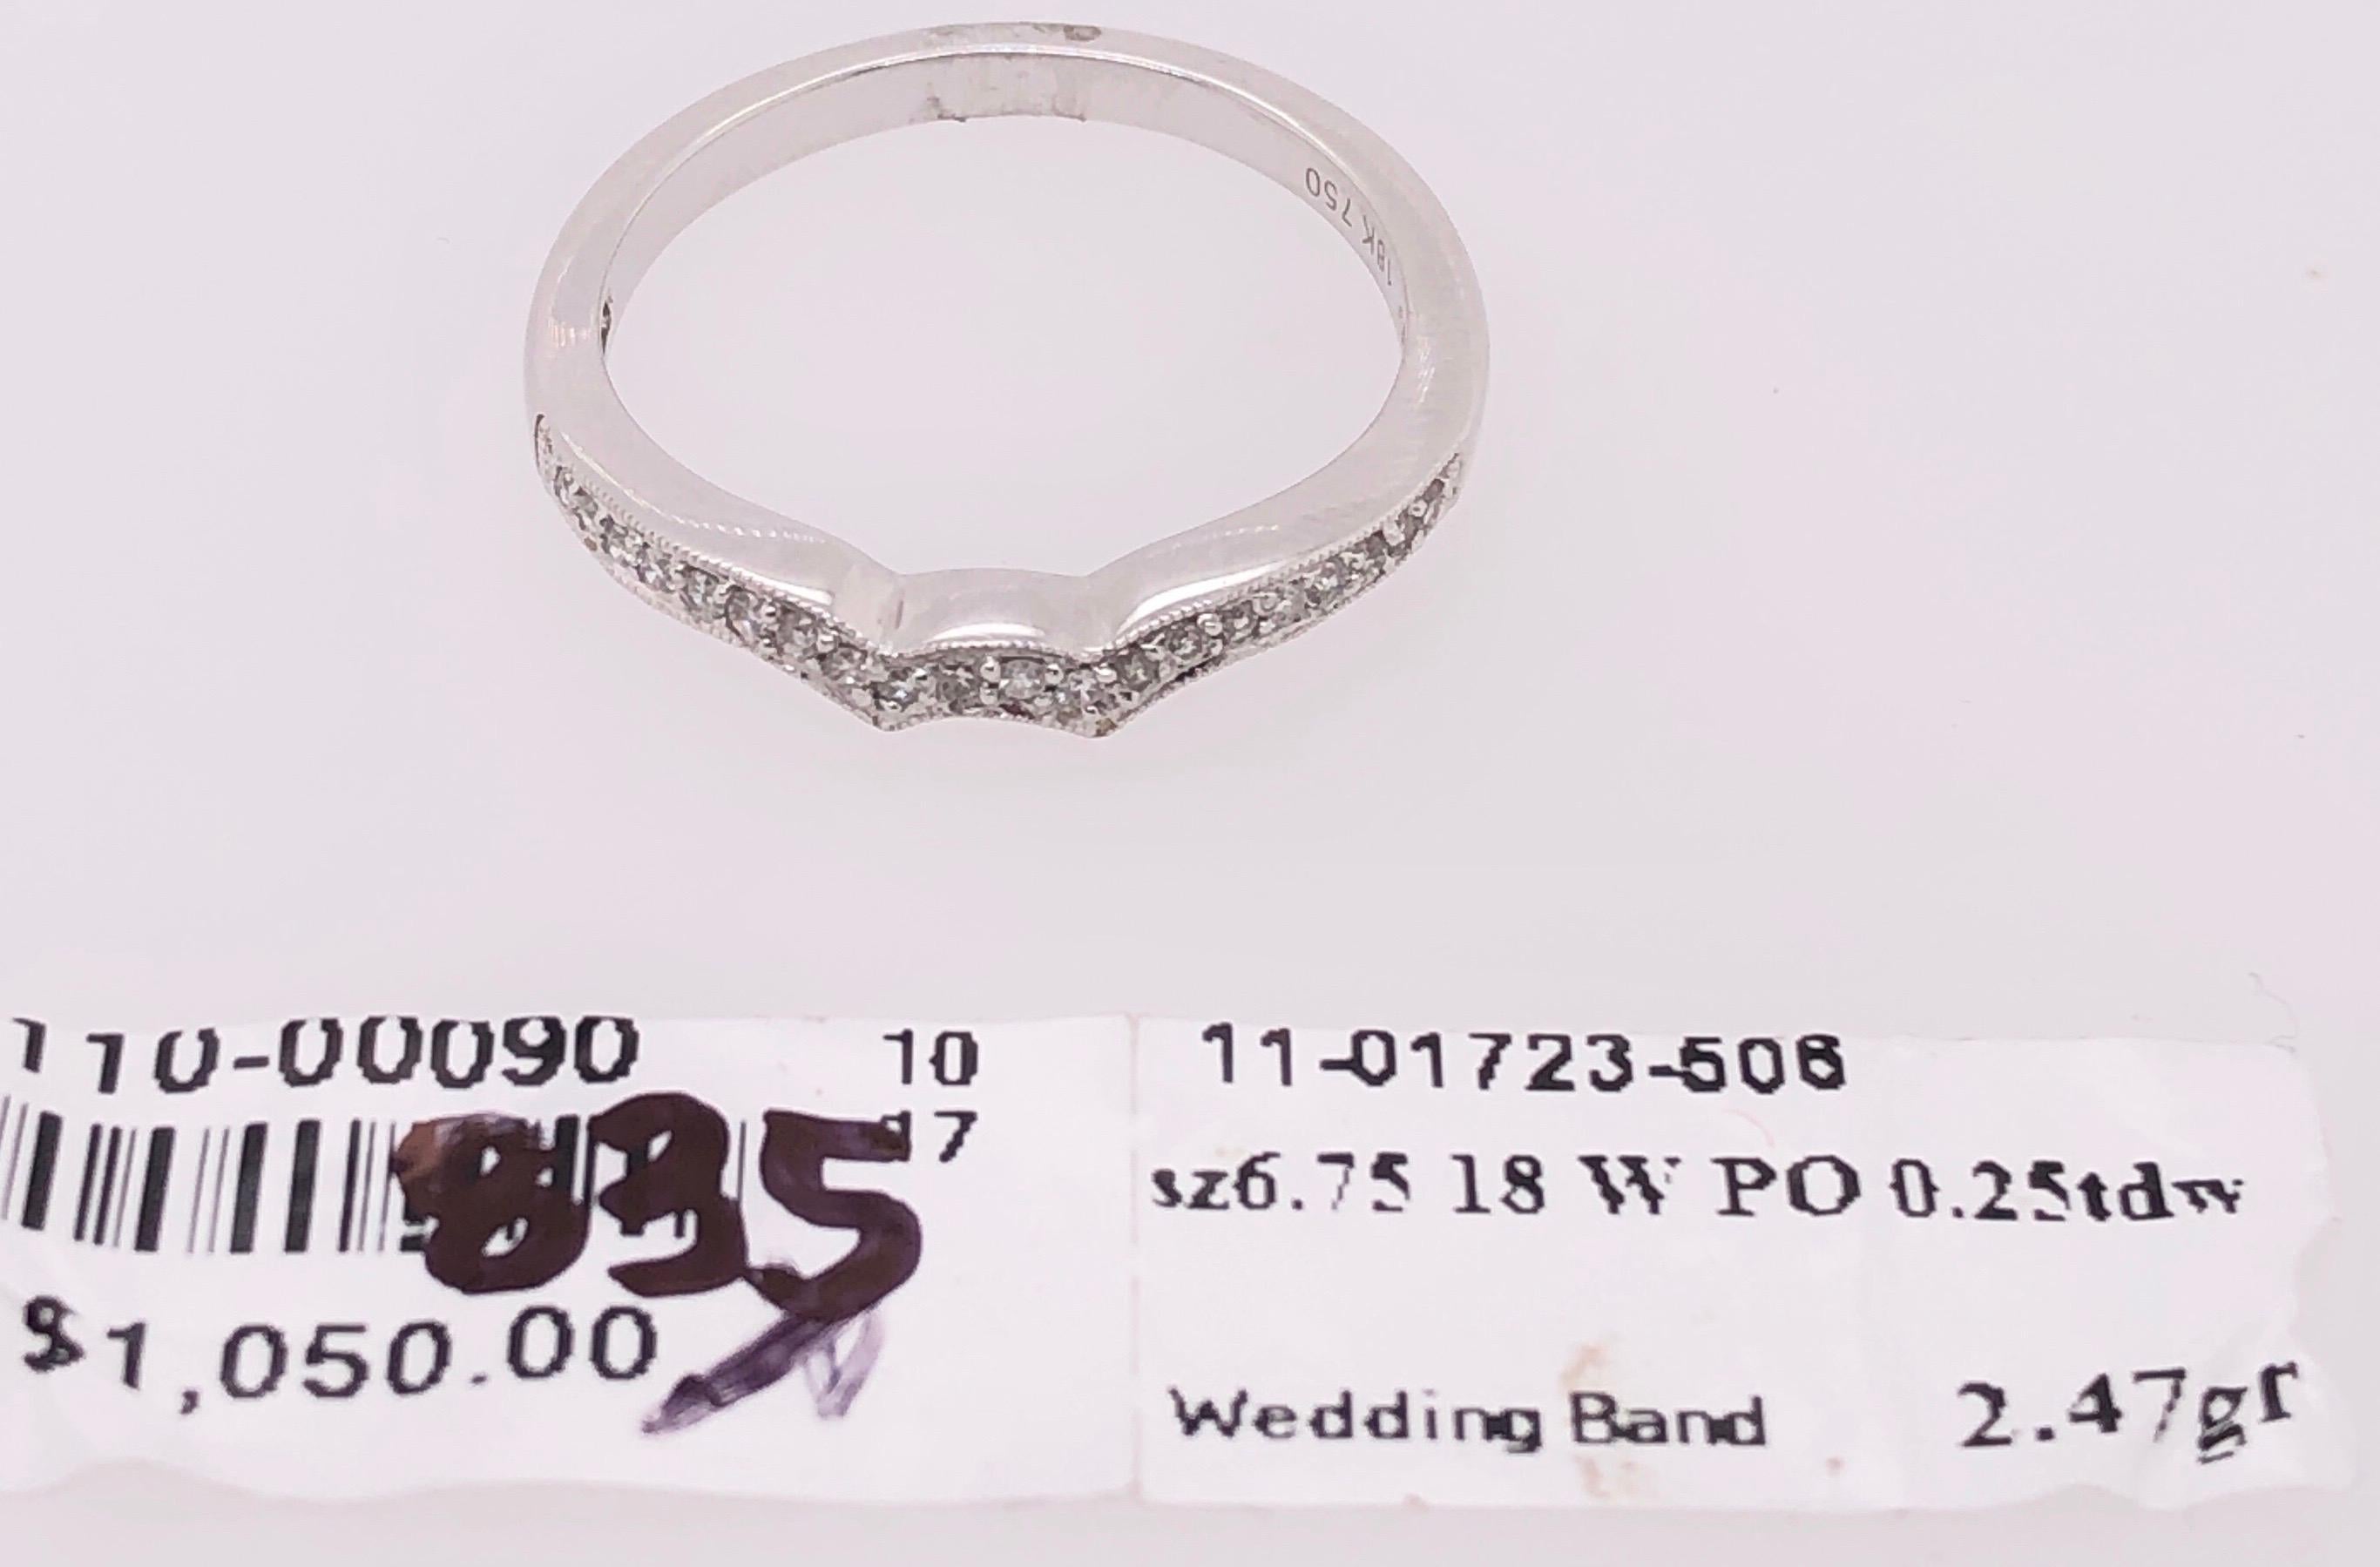 18 Karat White Gold and Diamond Wedding Contour Band Bridal Ring In Good Condition For Sale In Stamford, CT